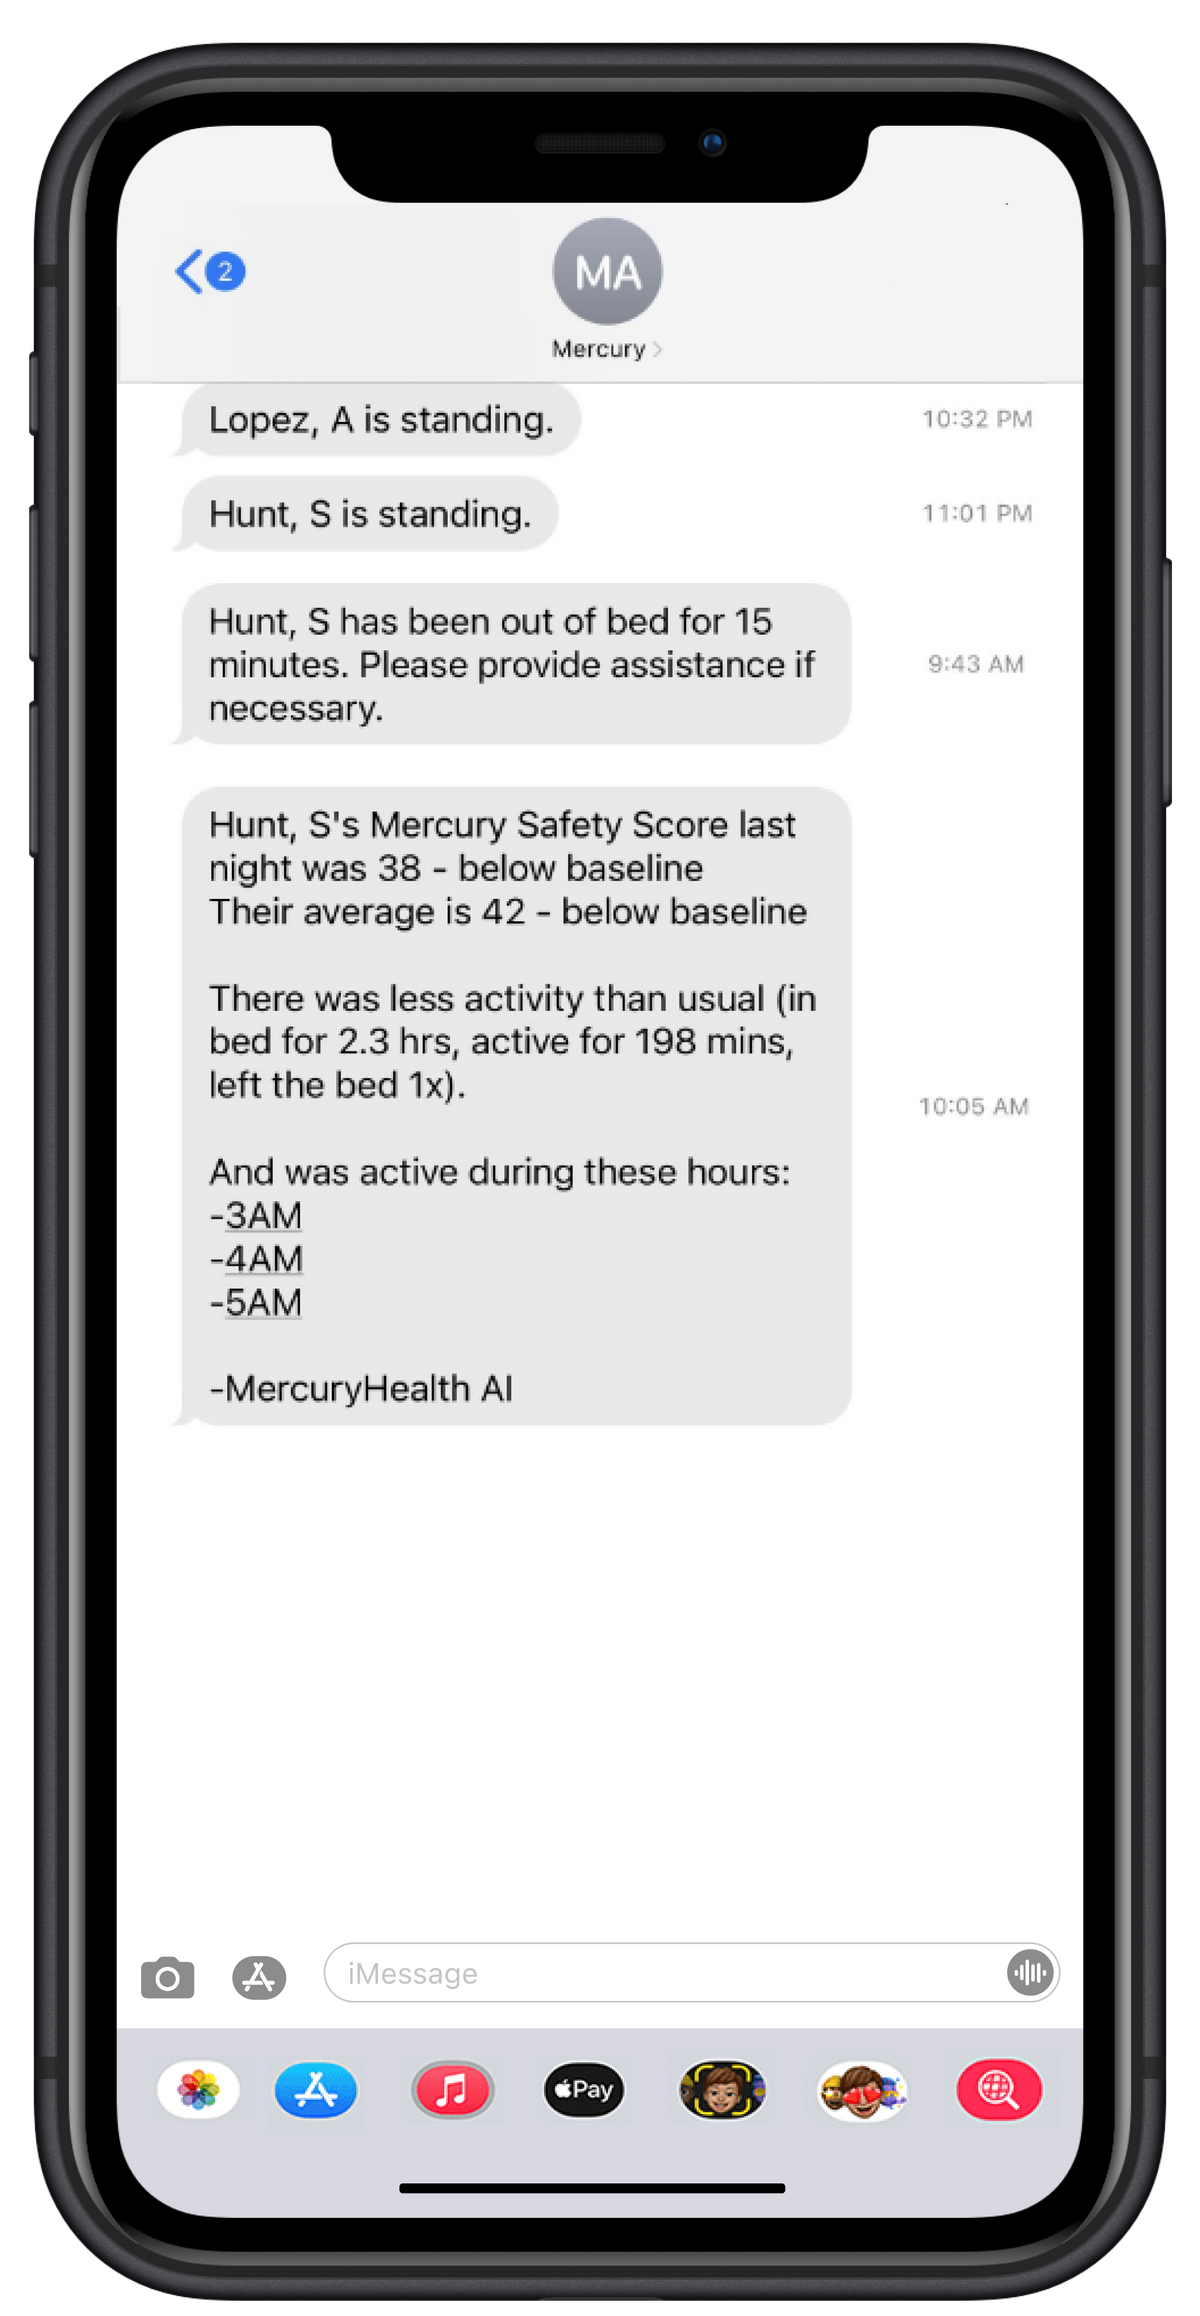 Receiving key safety alerts through message